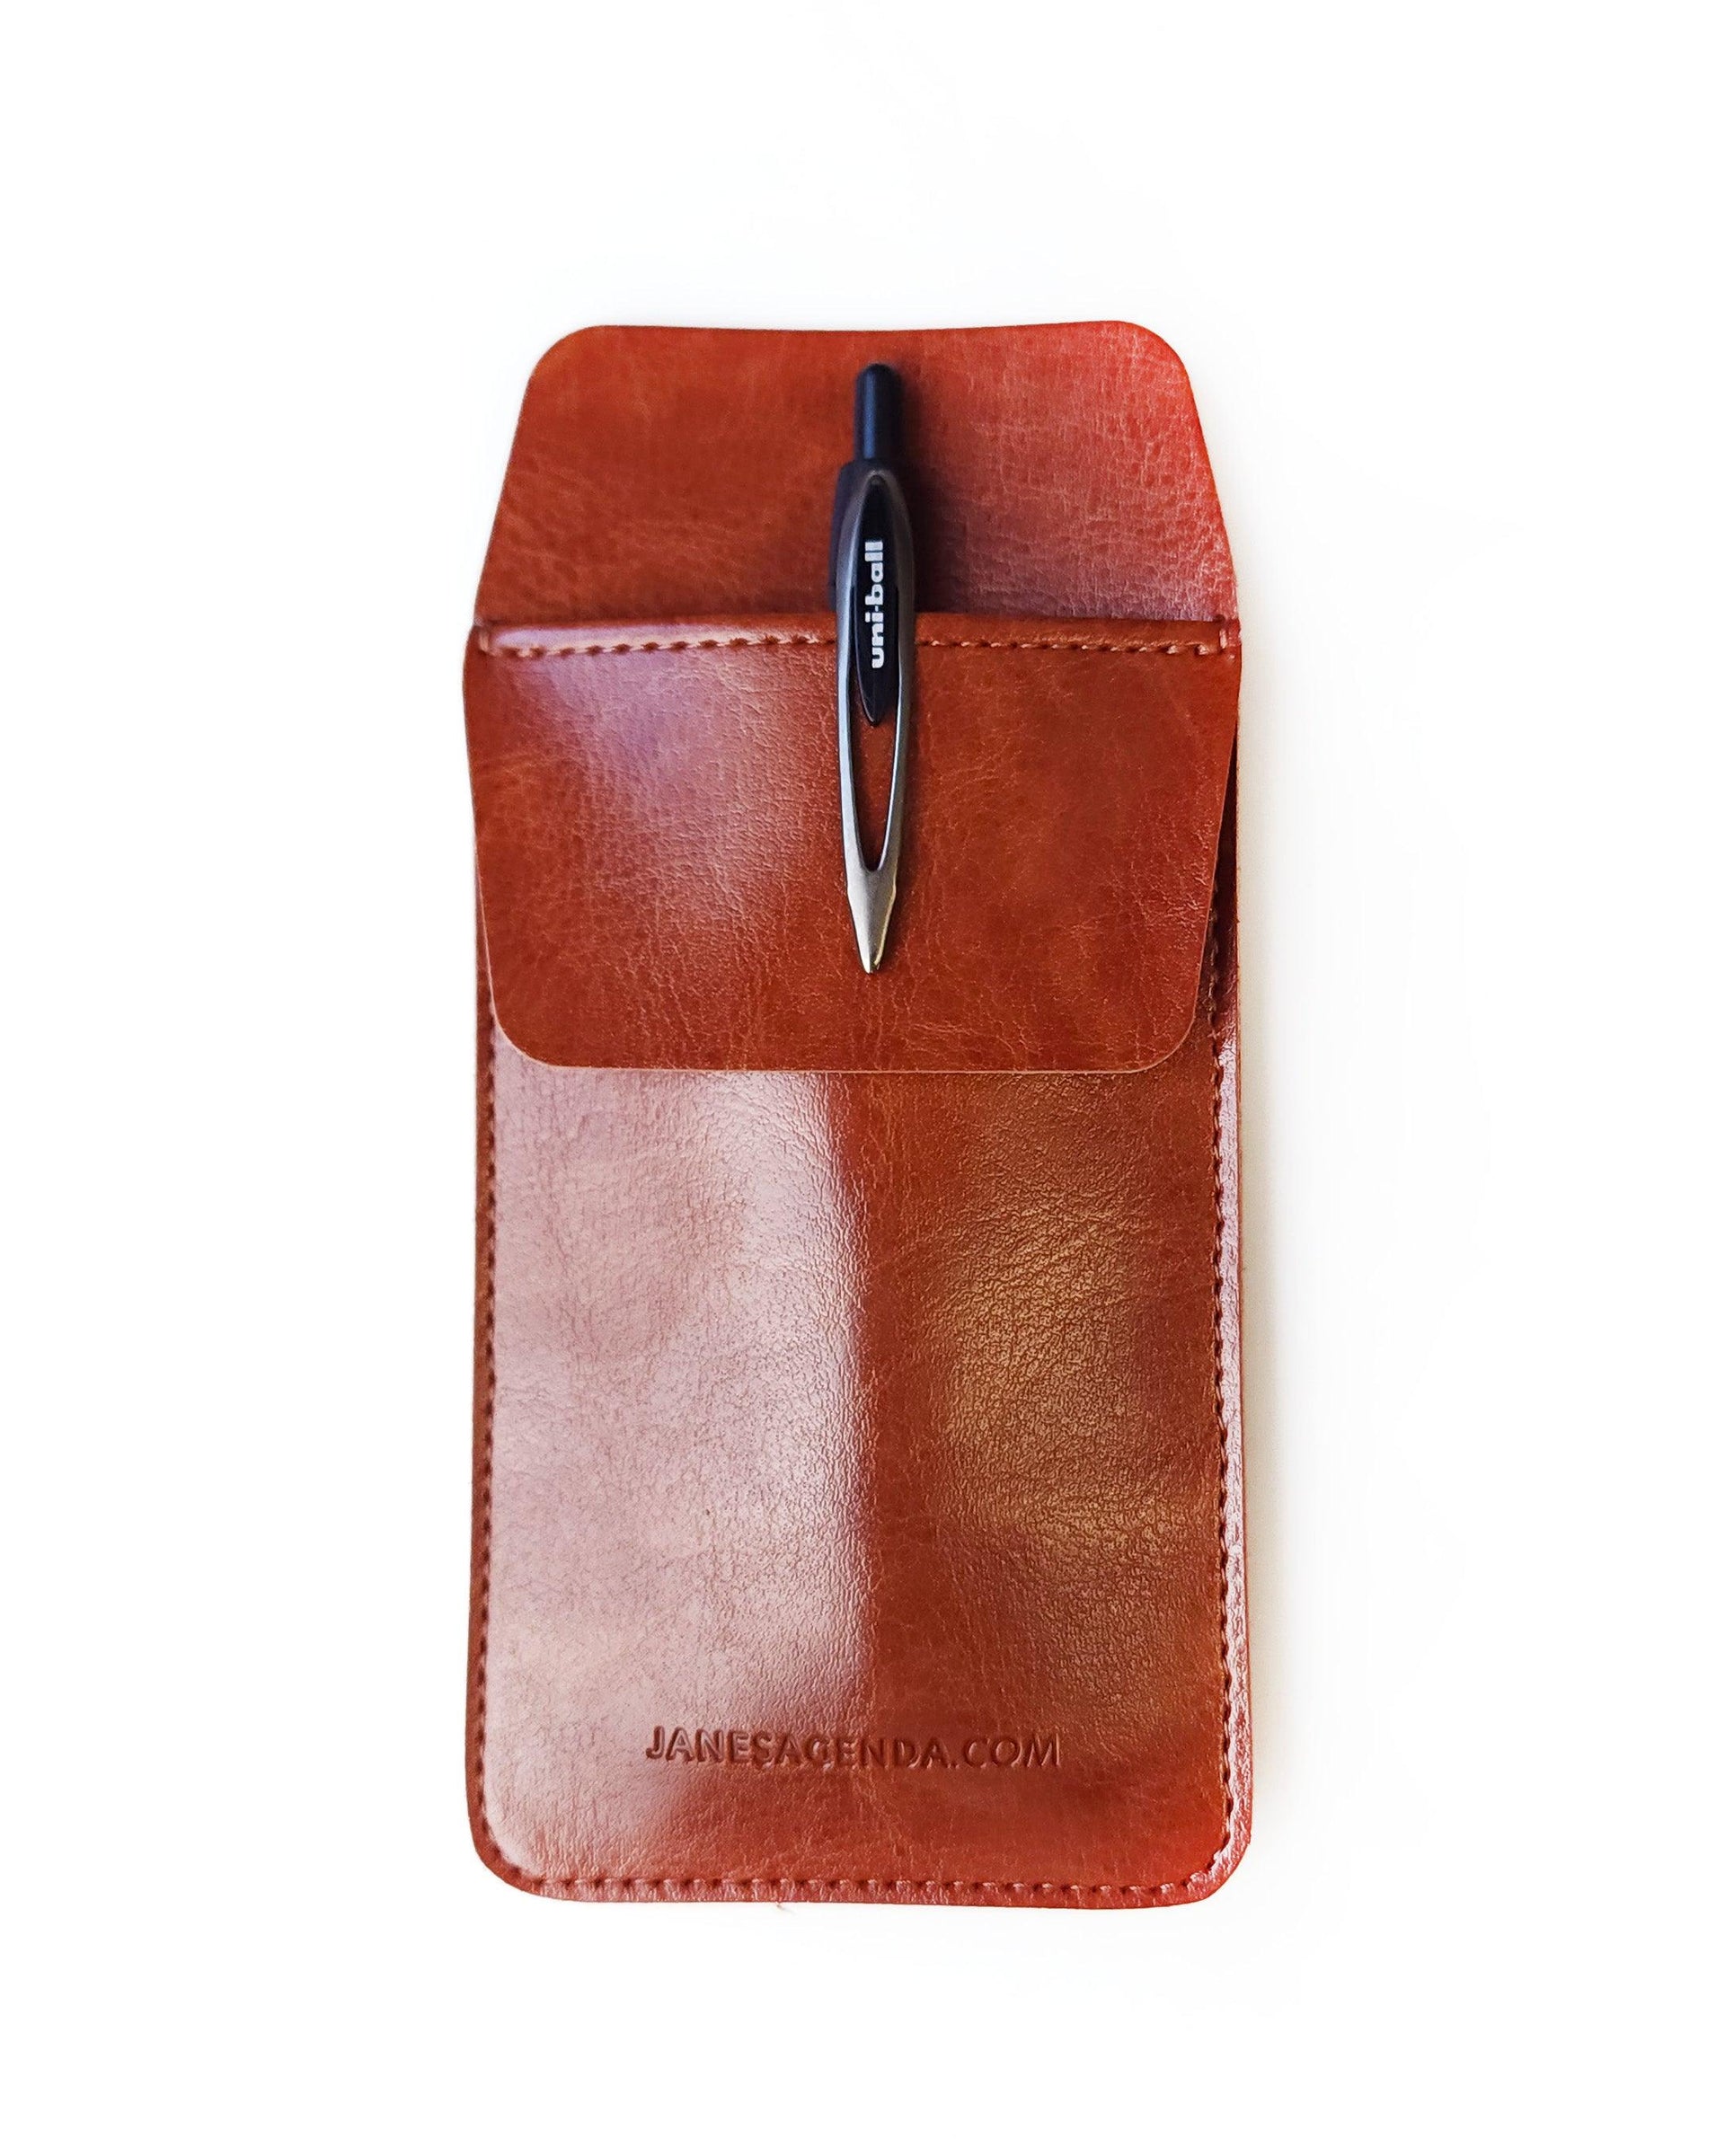 Vegan leather pocket protector pen holder by Jane's Agenda for all your stationary and planning needs.